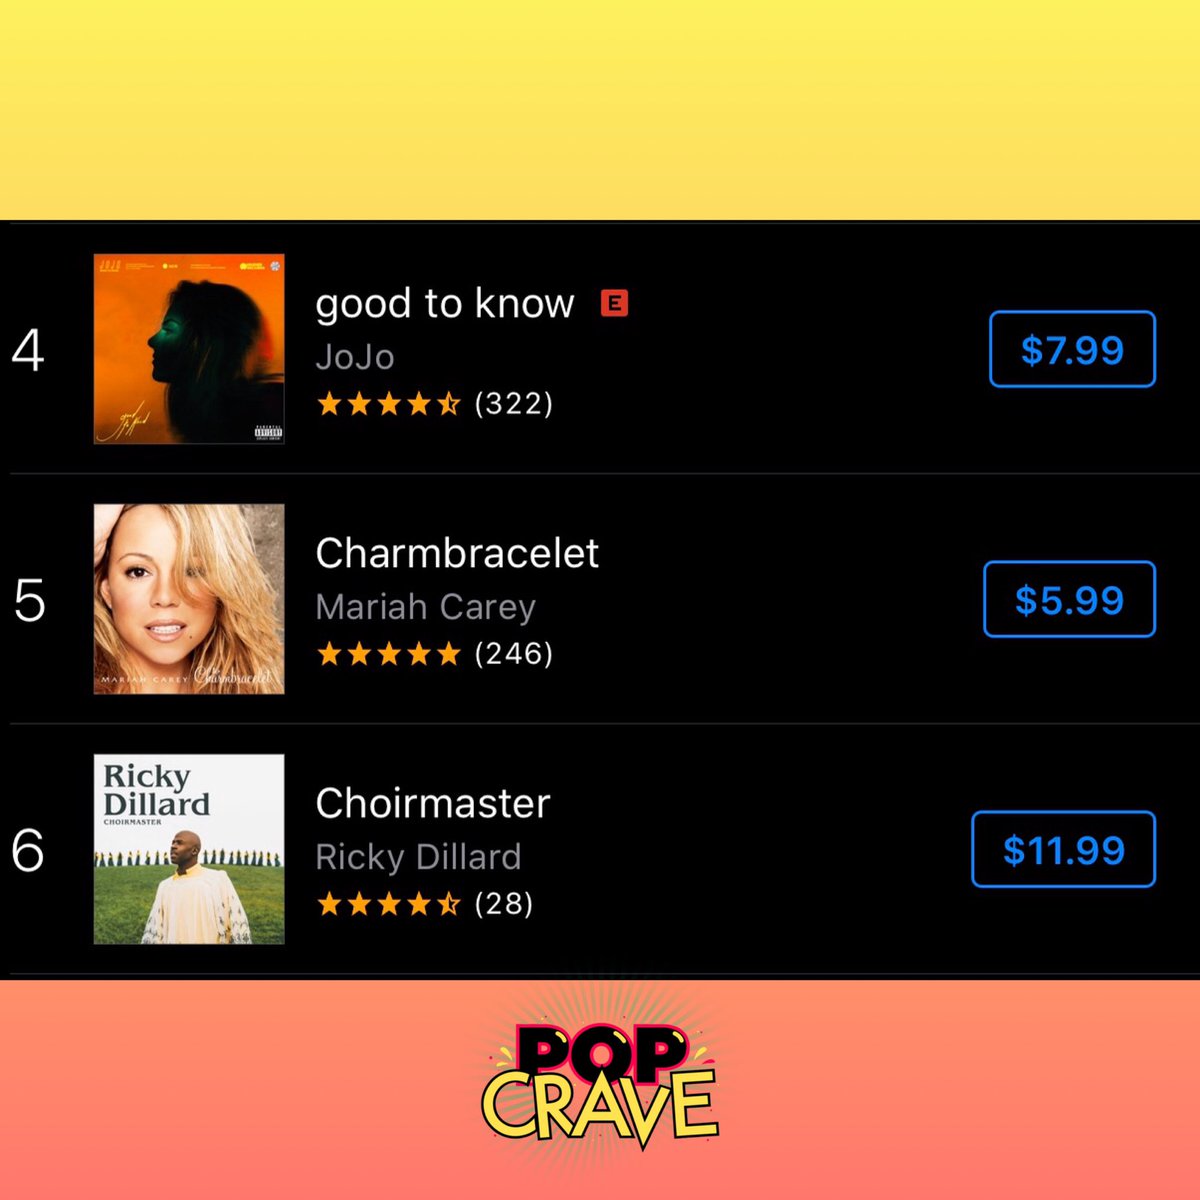 .@MariahCarey’s 2002 album, ‘Charmbracelet,’ has entered the Top 5 on US iTunes at #5.